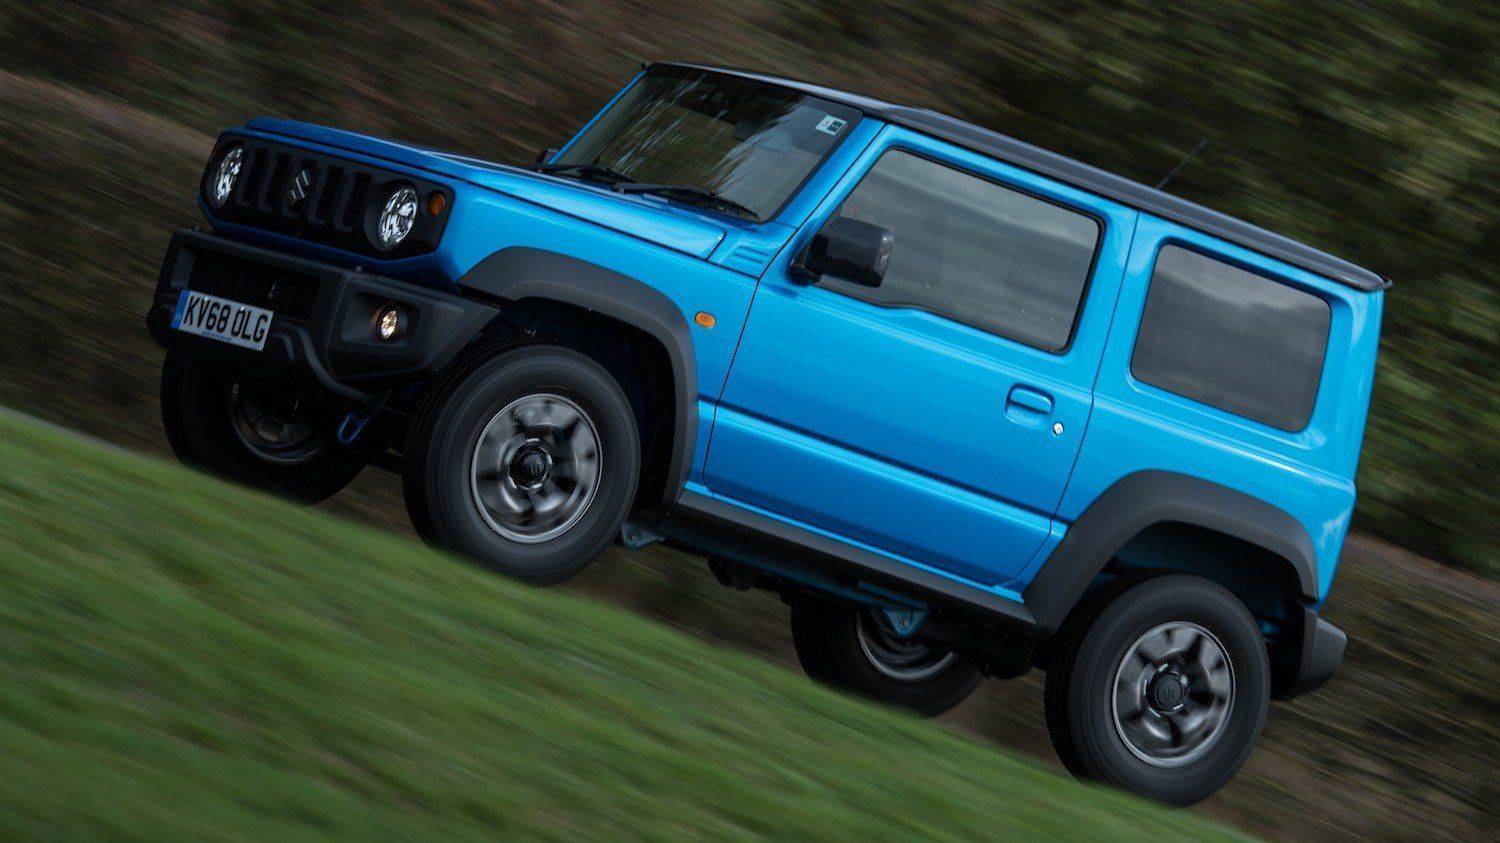 -Scanlan-takes-the-All-New-Jimny-on-and-off-road-7.jpg